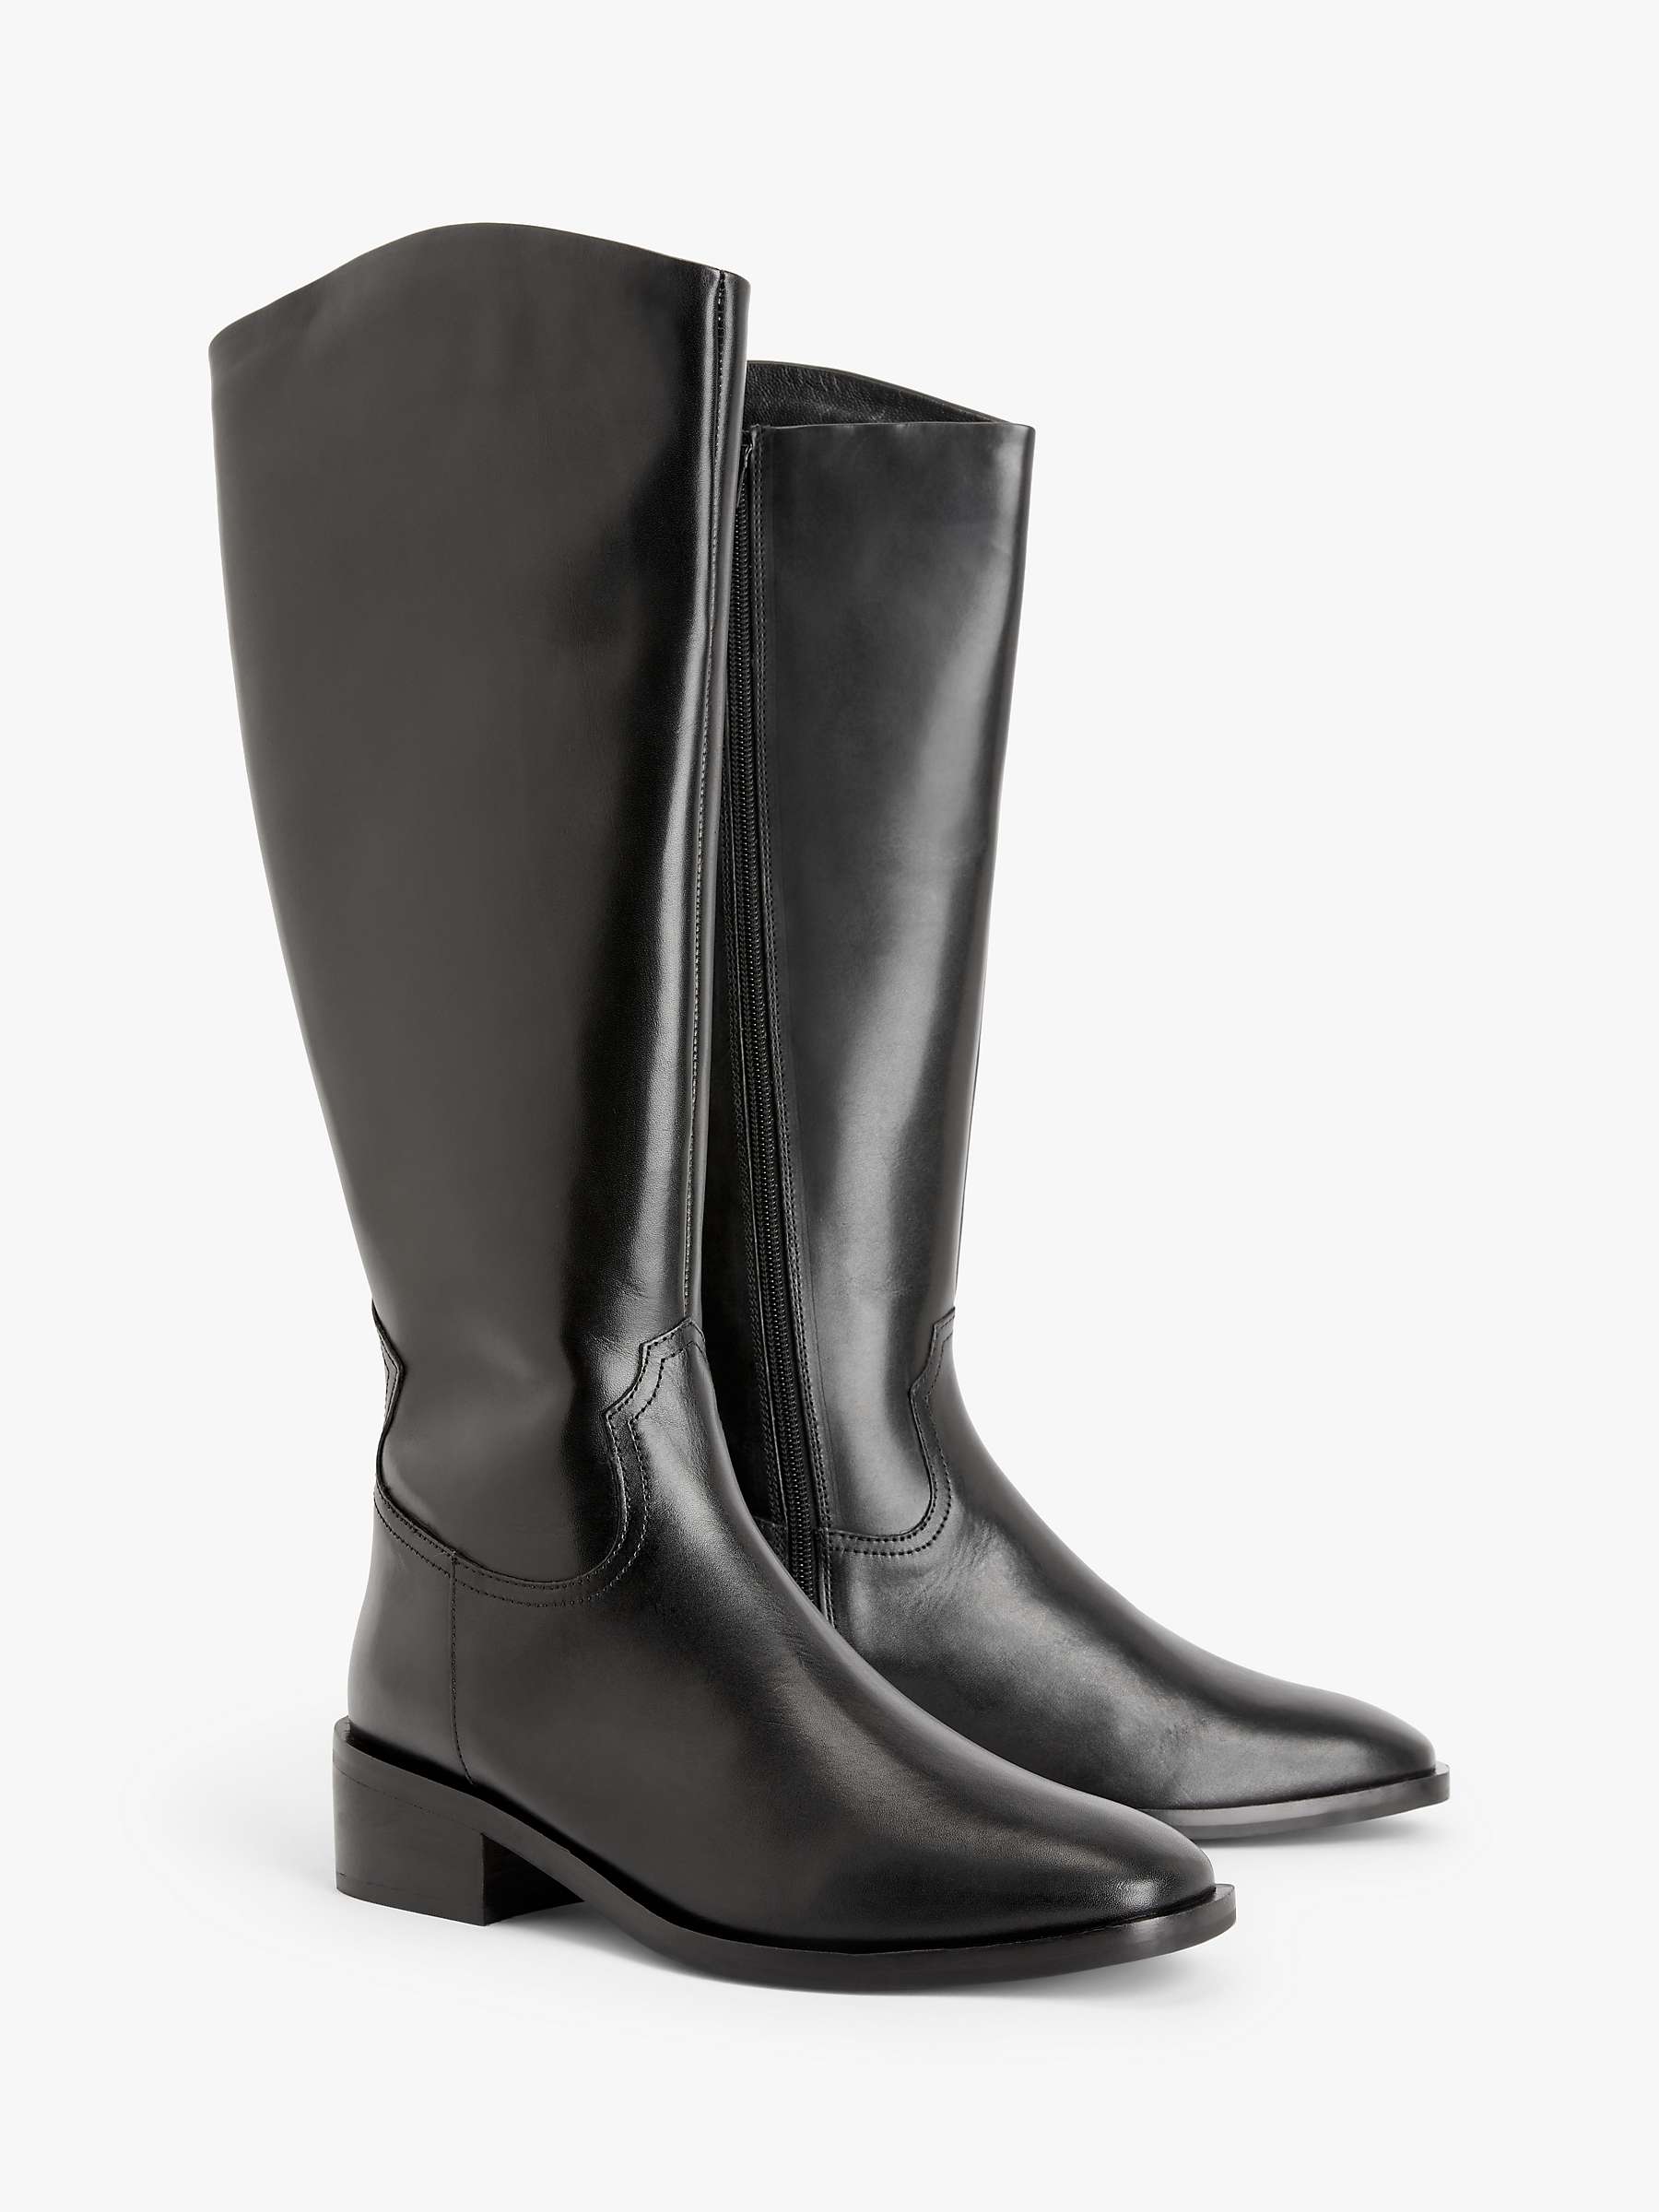 AND/OR Tillie Leather Knee High Western Boots, Black at John Lewis ...